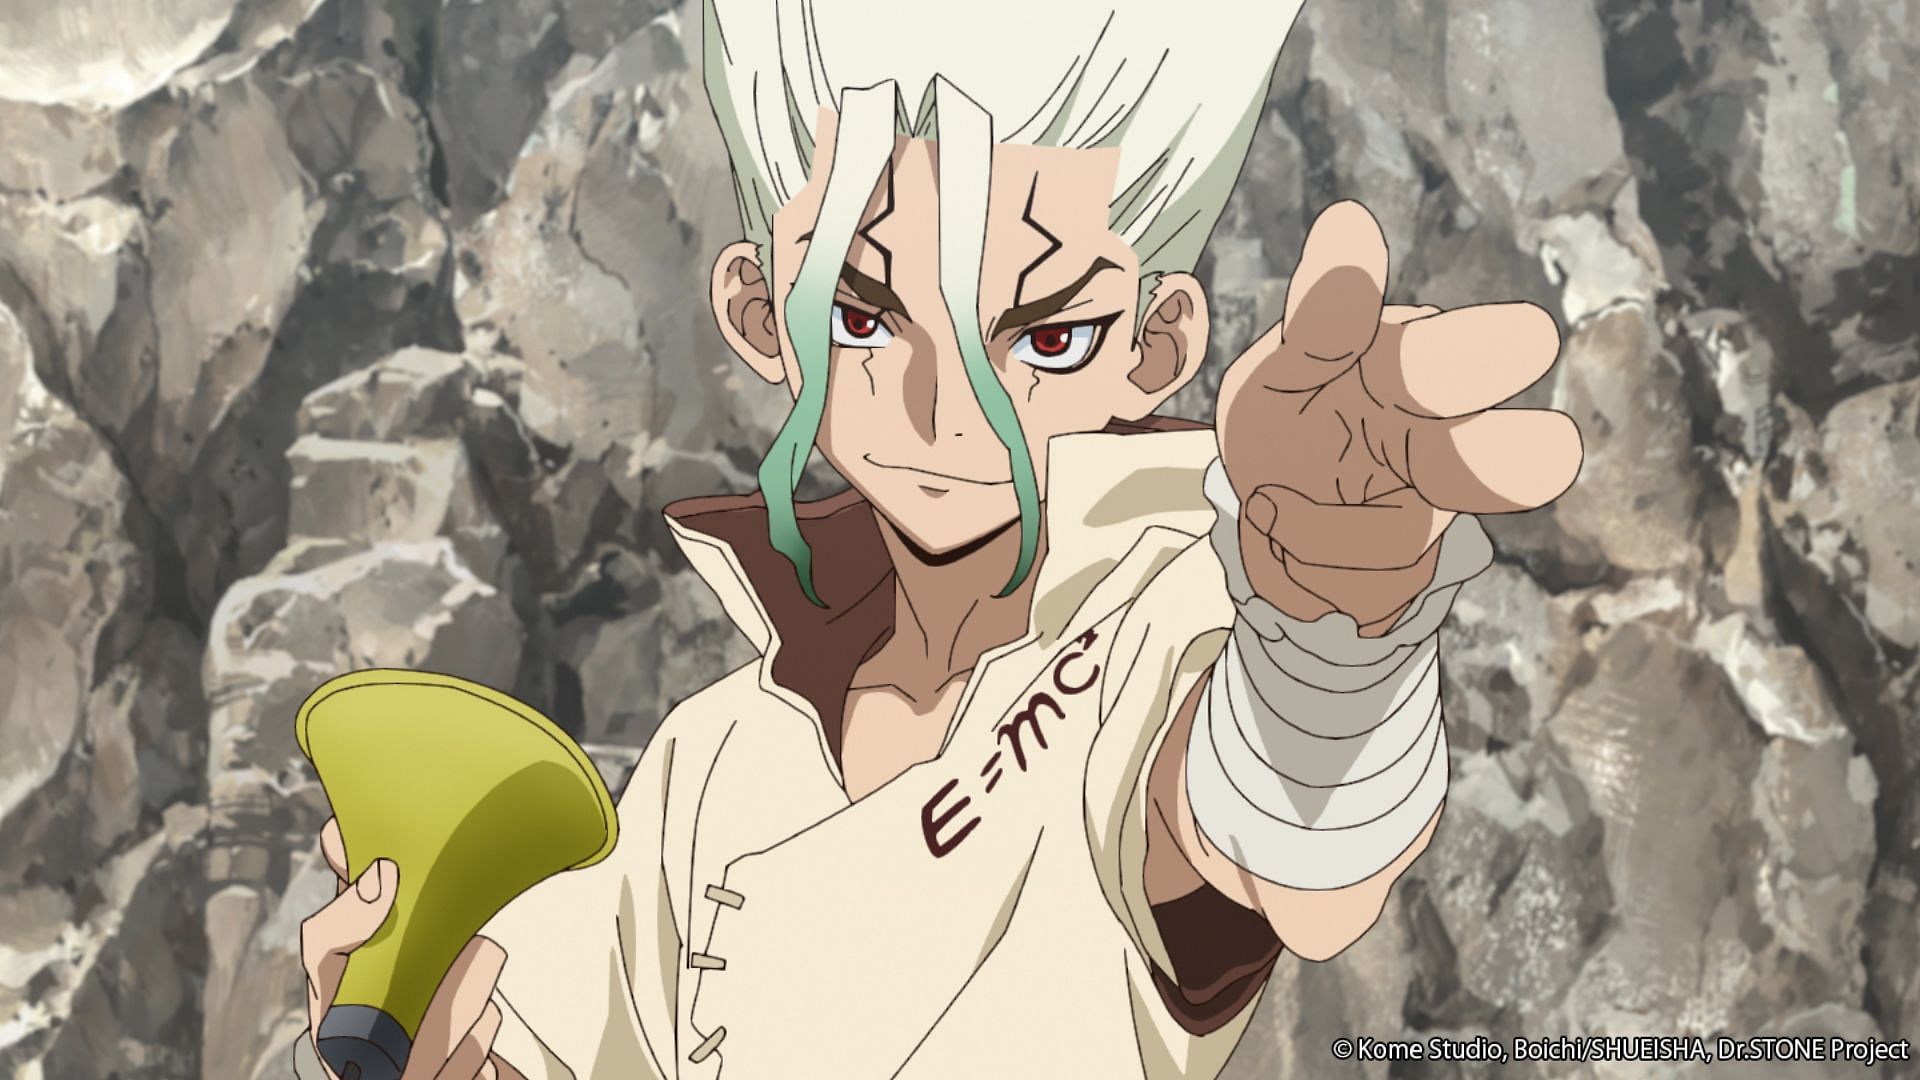 Dr. Stone season 4 seemingly confirmed in latest Weekly Shonen Jump issue (Image via TMS Entertainment)